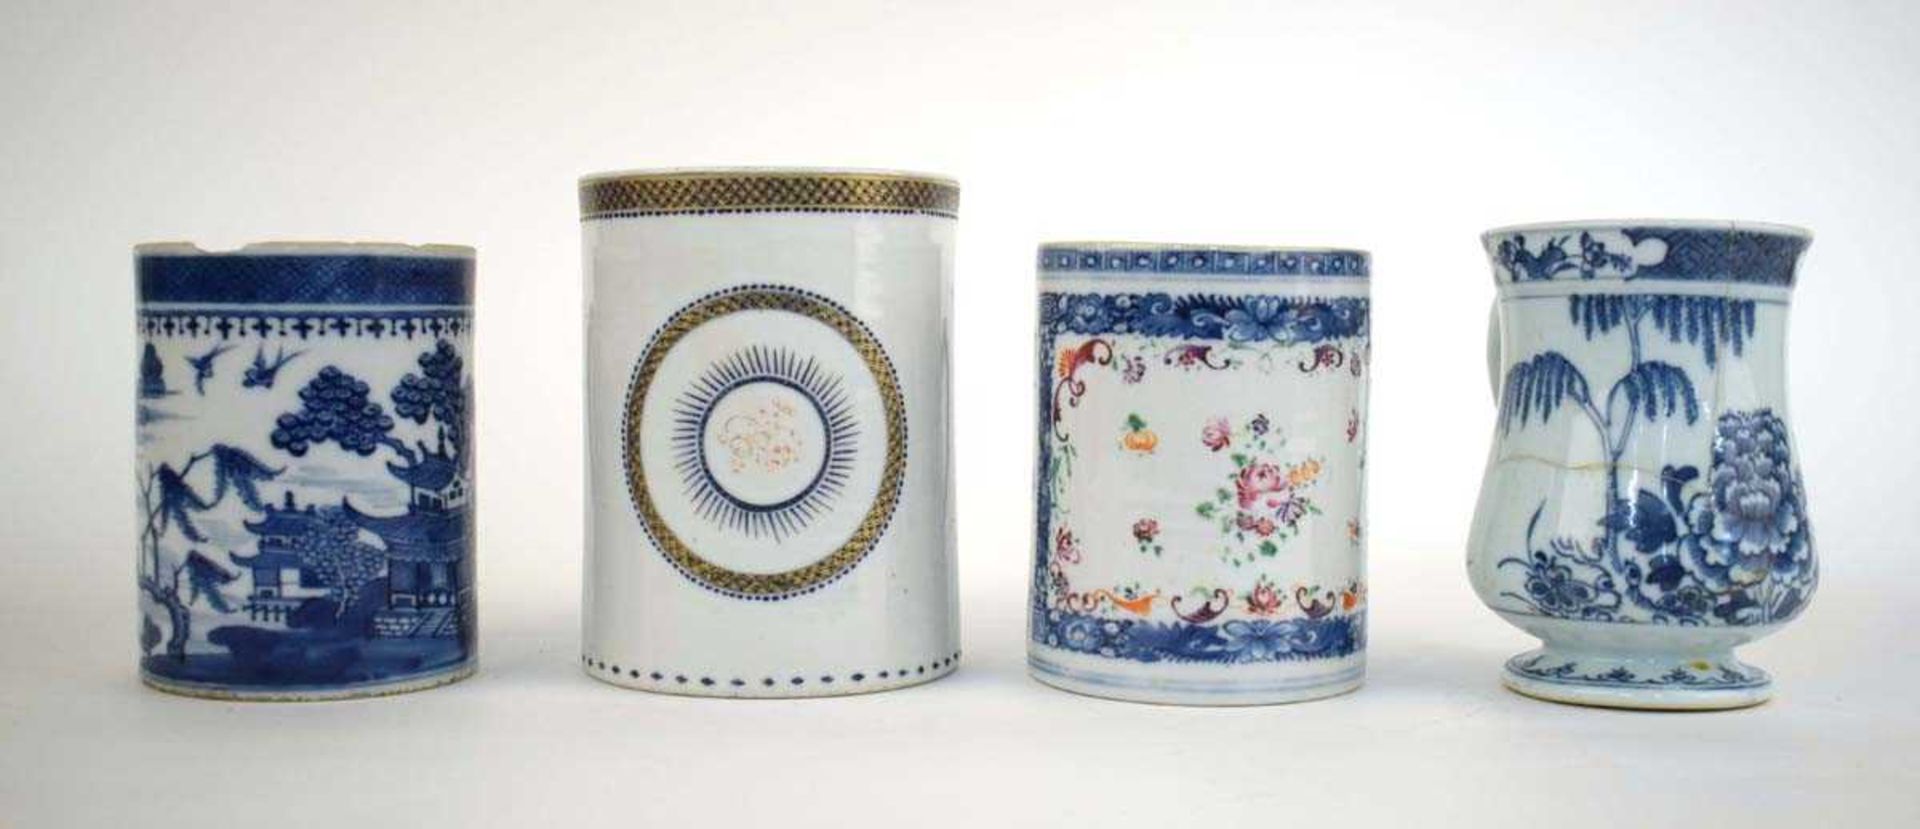 A Chinese Export blue and white tankard with entwined handle and concentric ring decoration, h. 14